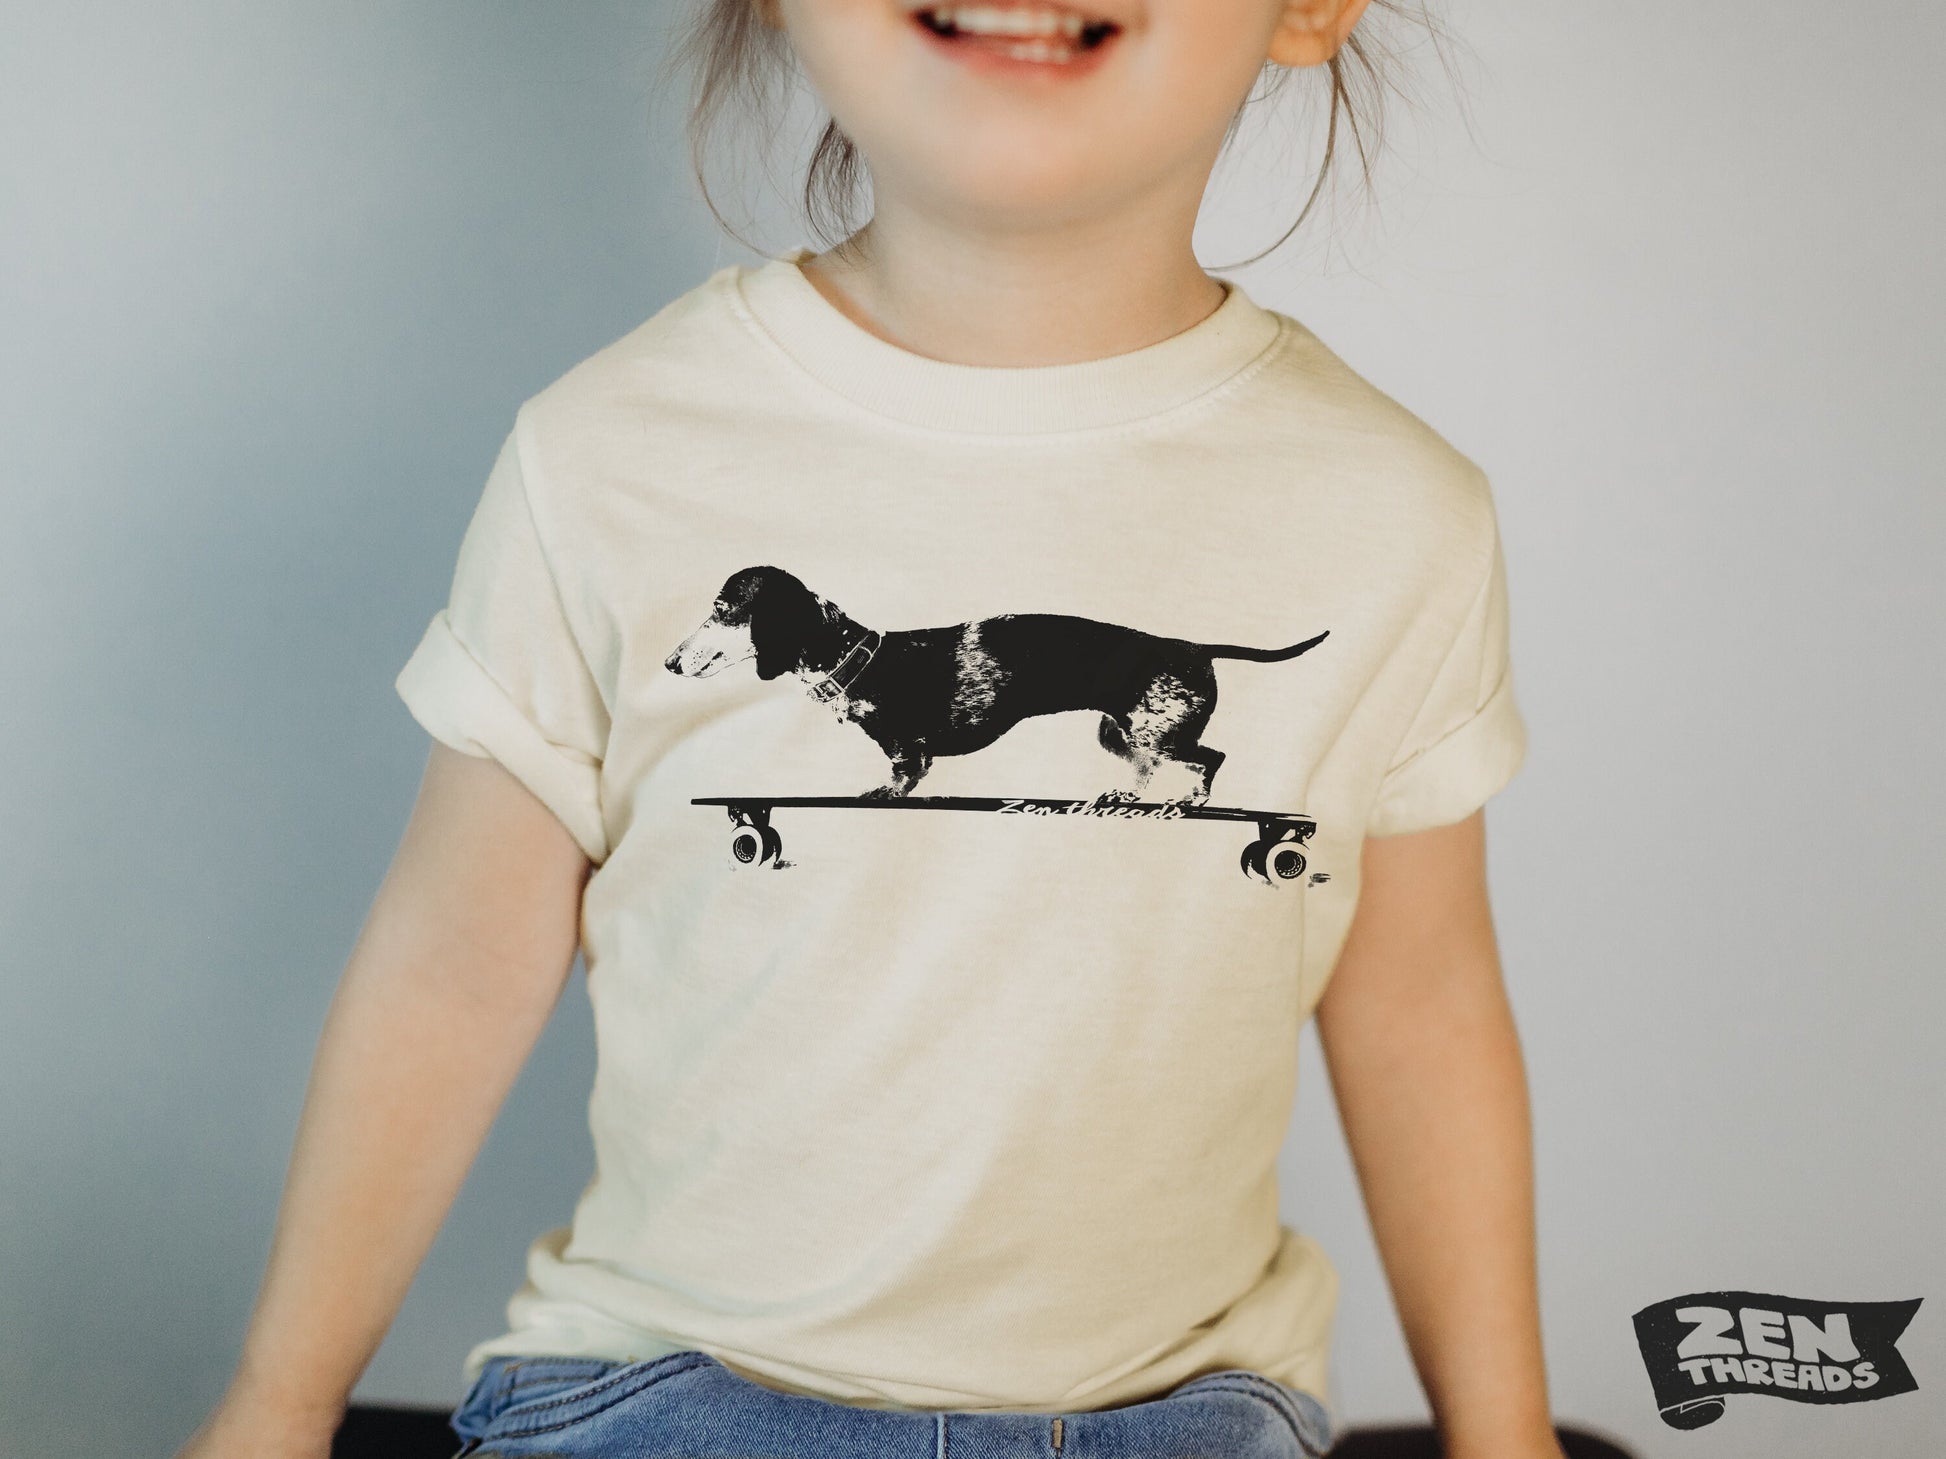 Longboard DACHSHUND Kids Premium vintage soft Tee T-Shirt Fine Jersey T-Shirt (+Colors) youth tee toddler sizes doxie dog skating skateboard